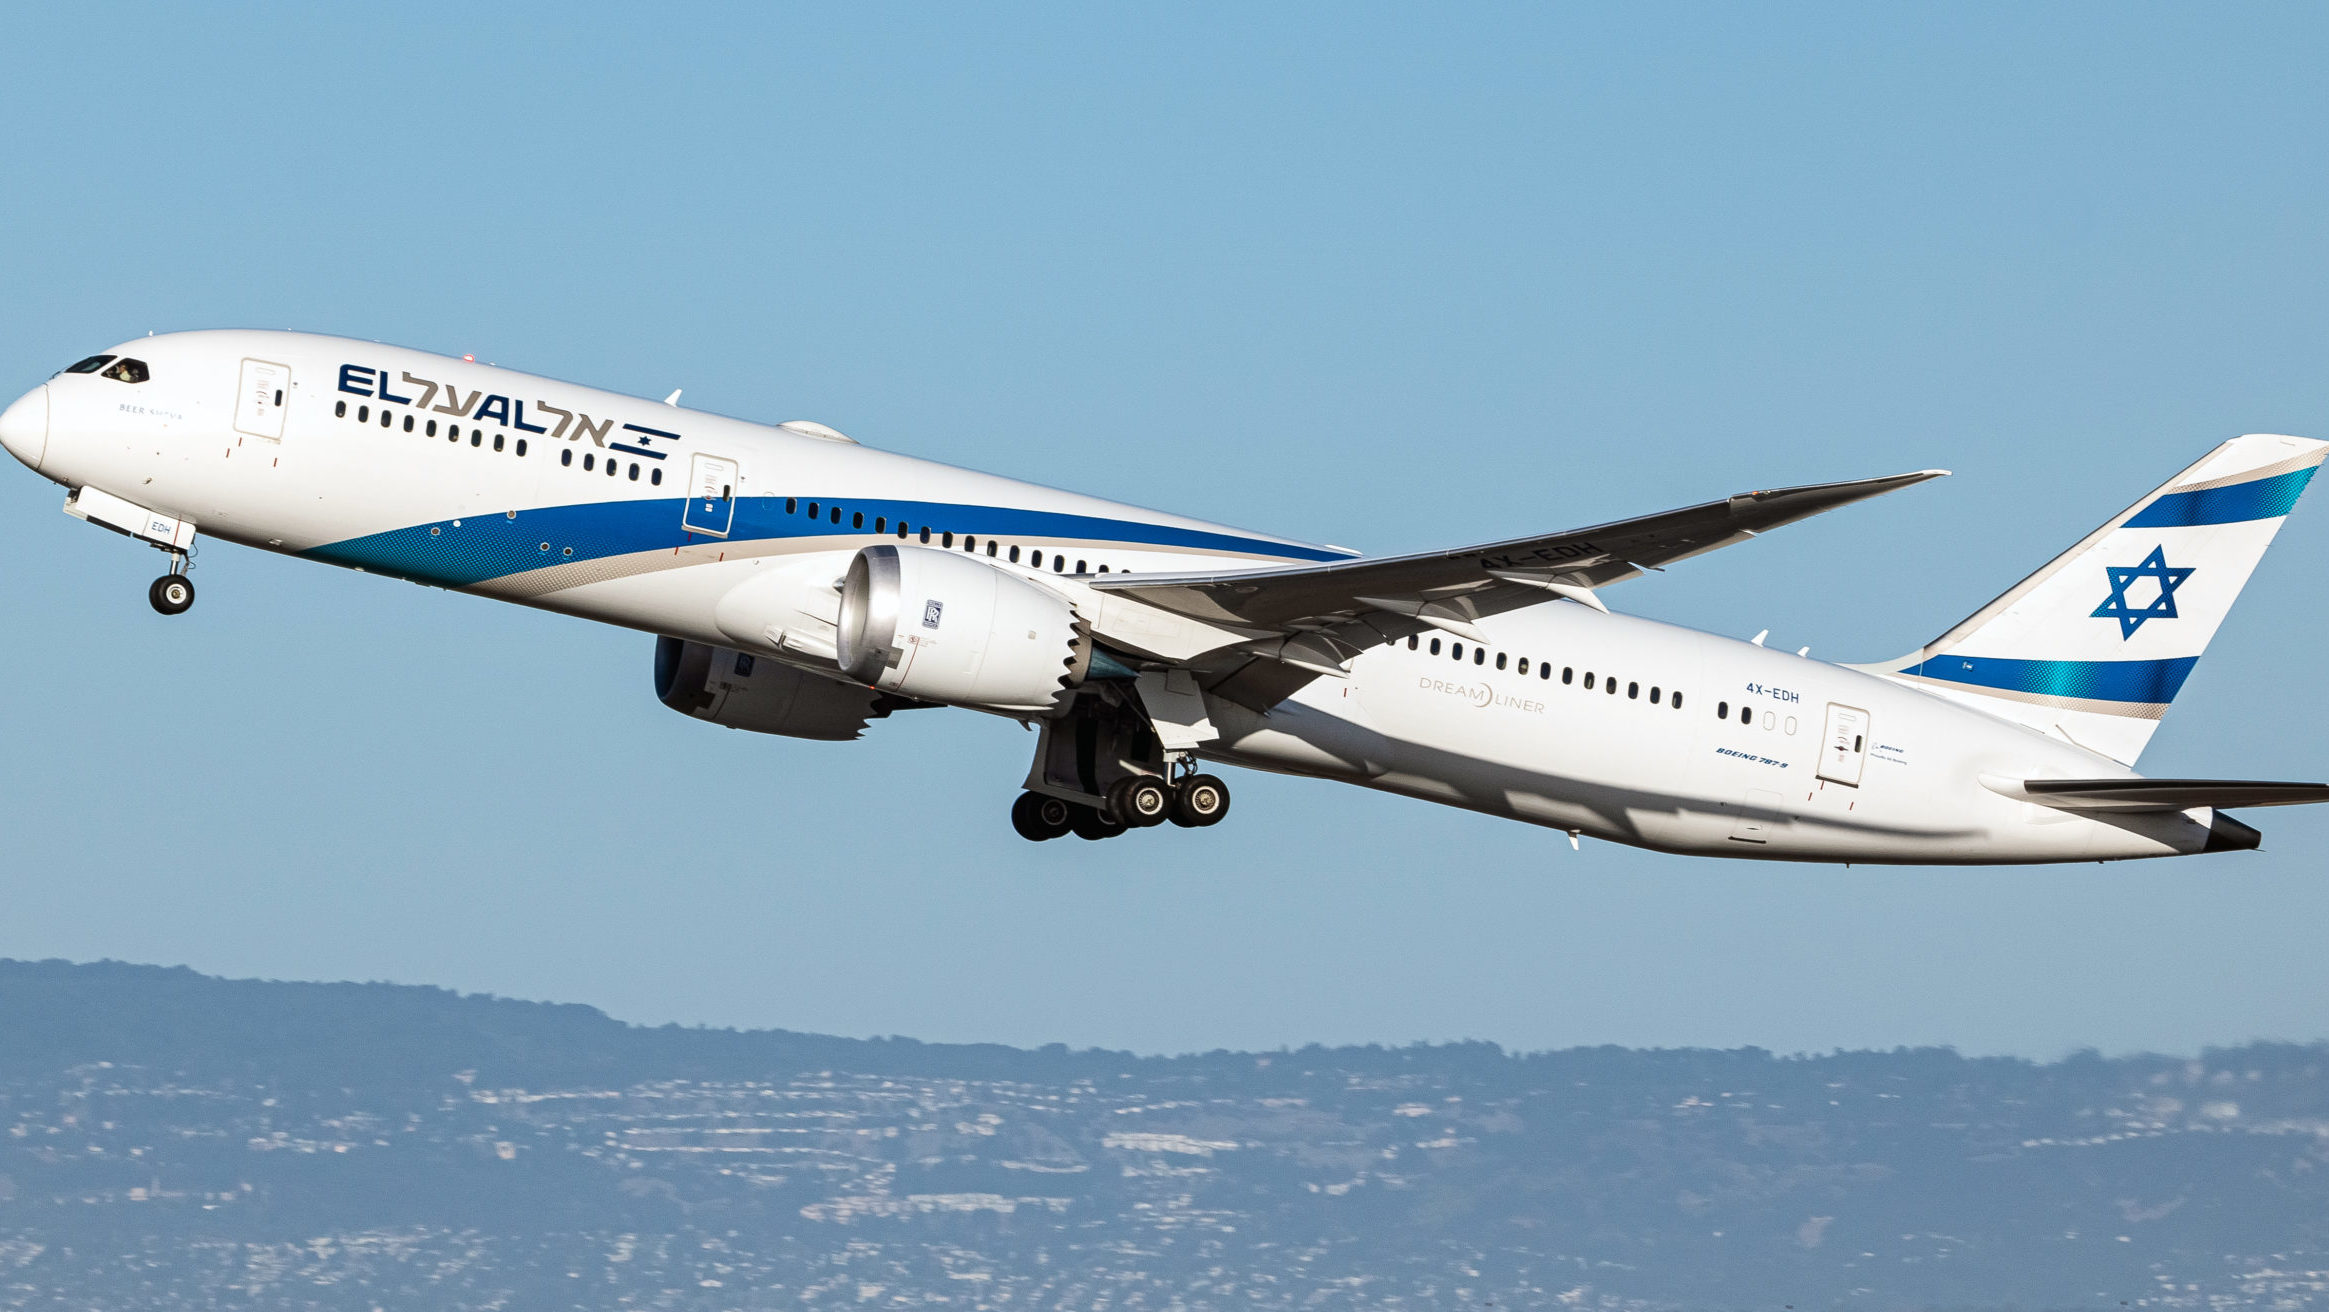 El Al Reaches Deal with Unions to Help Remain Airborne